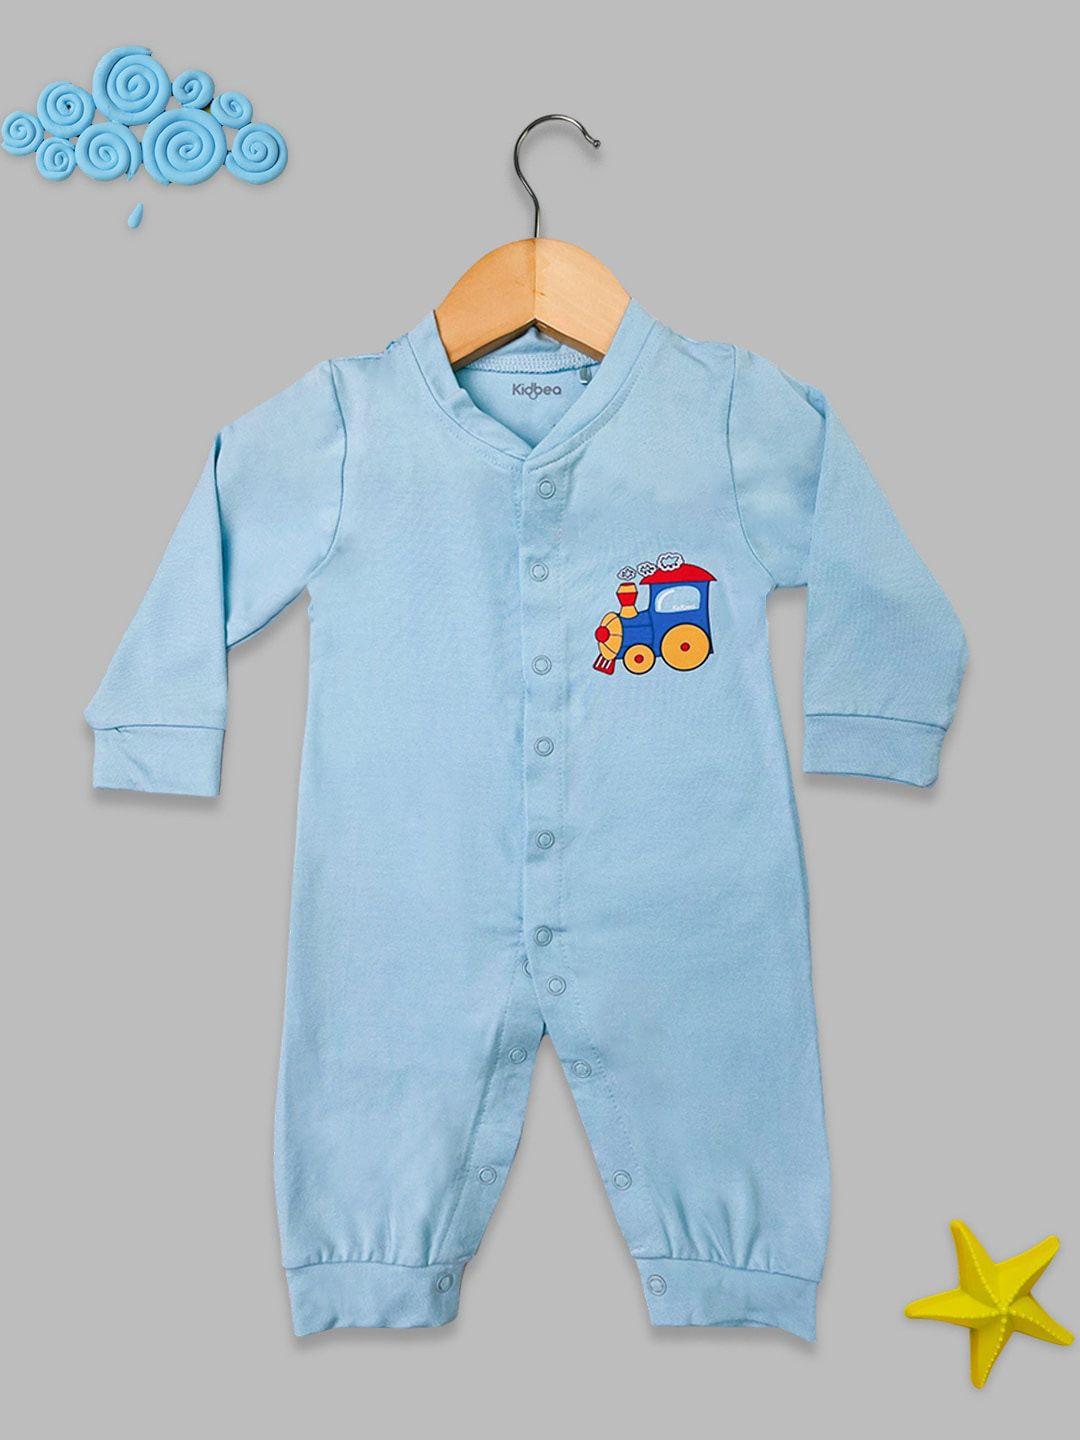 Kidbea Infant Boys Bamboo Cotton Rompers